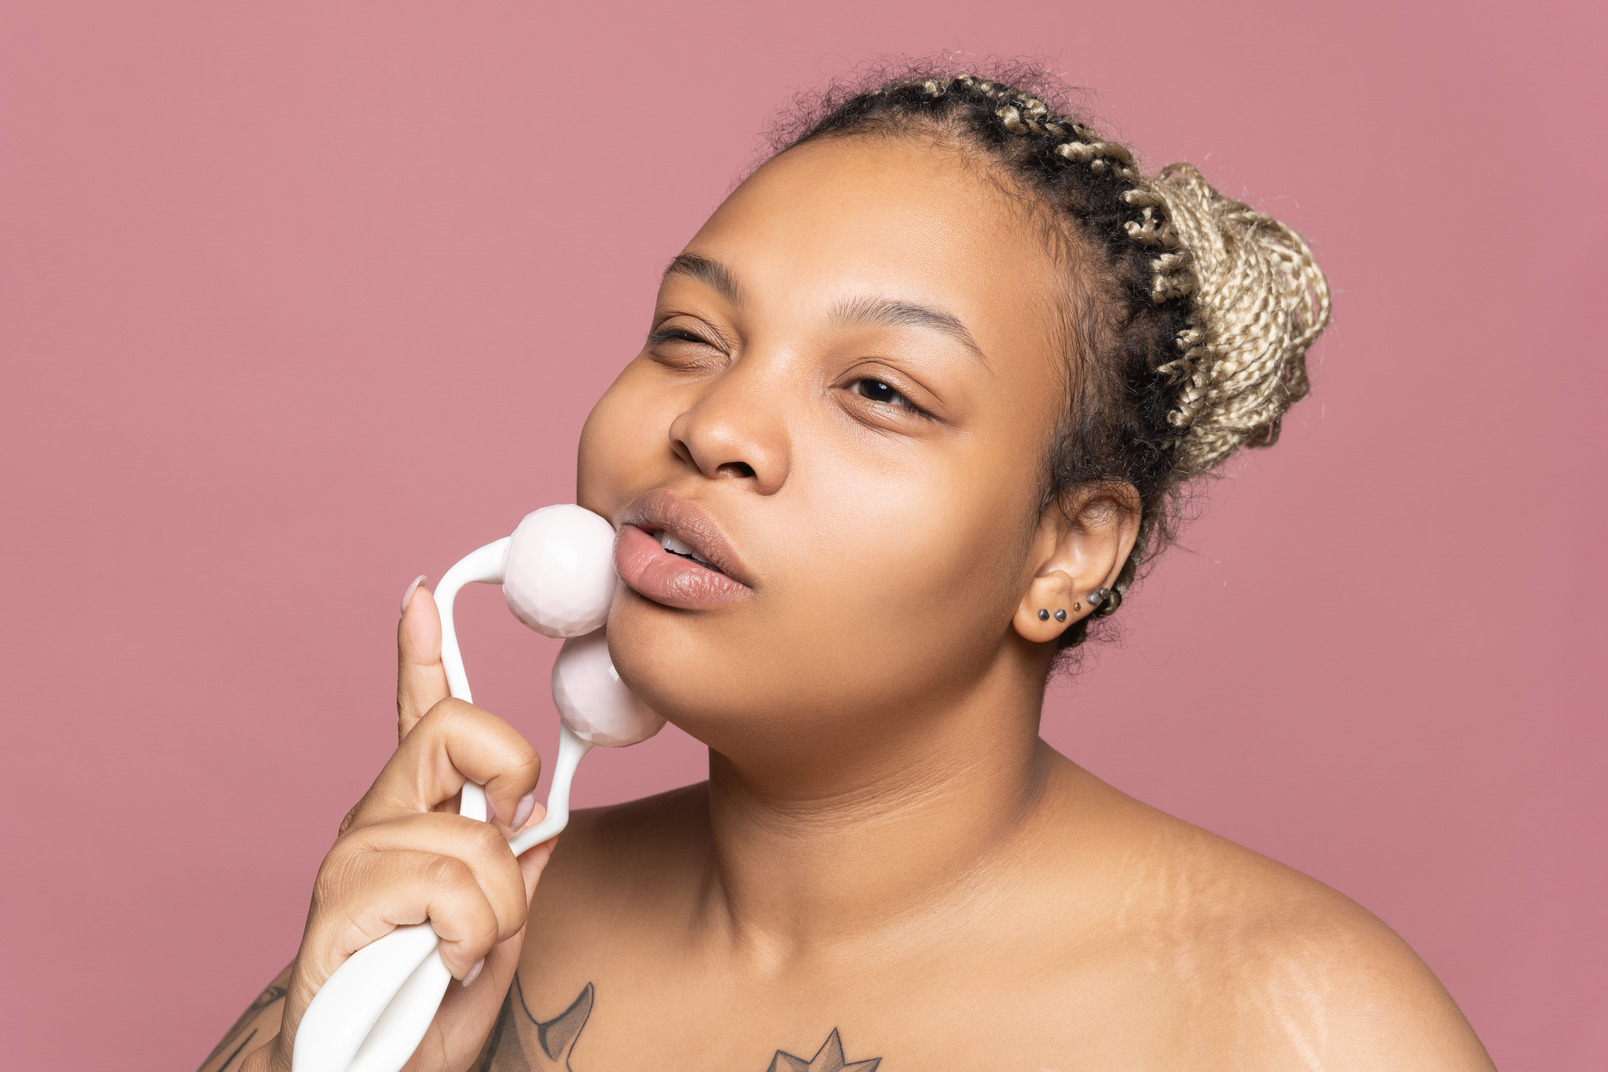 Black woman doing a face massage with a roller aplicator